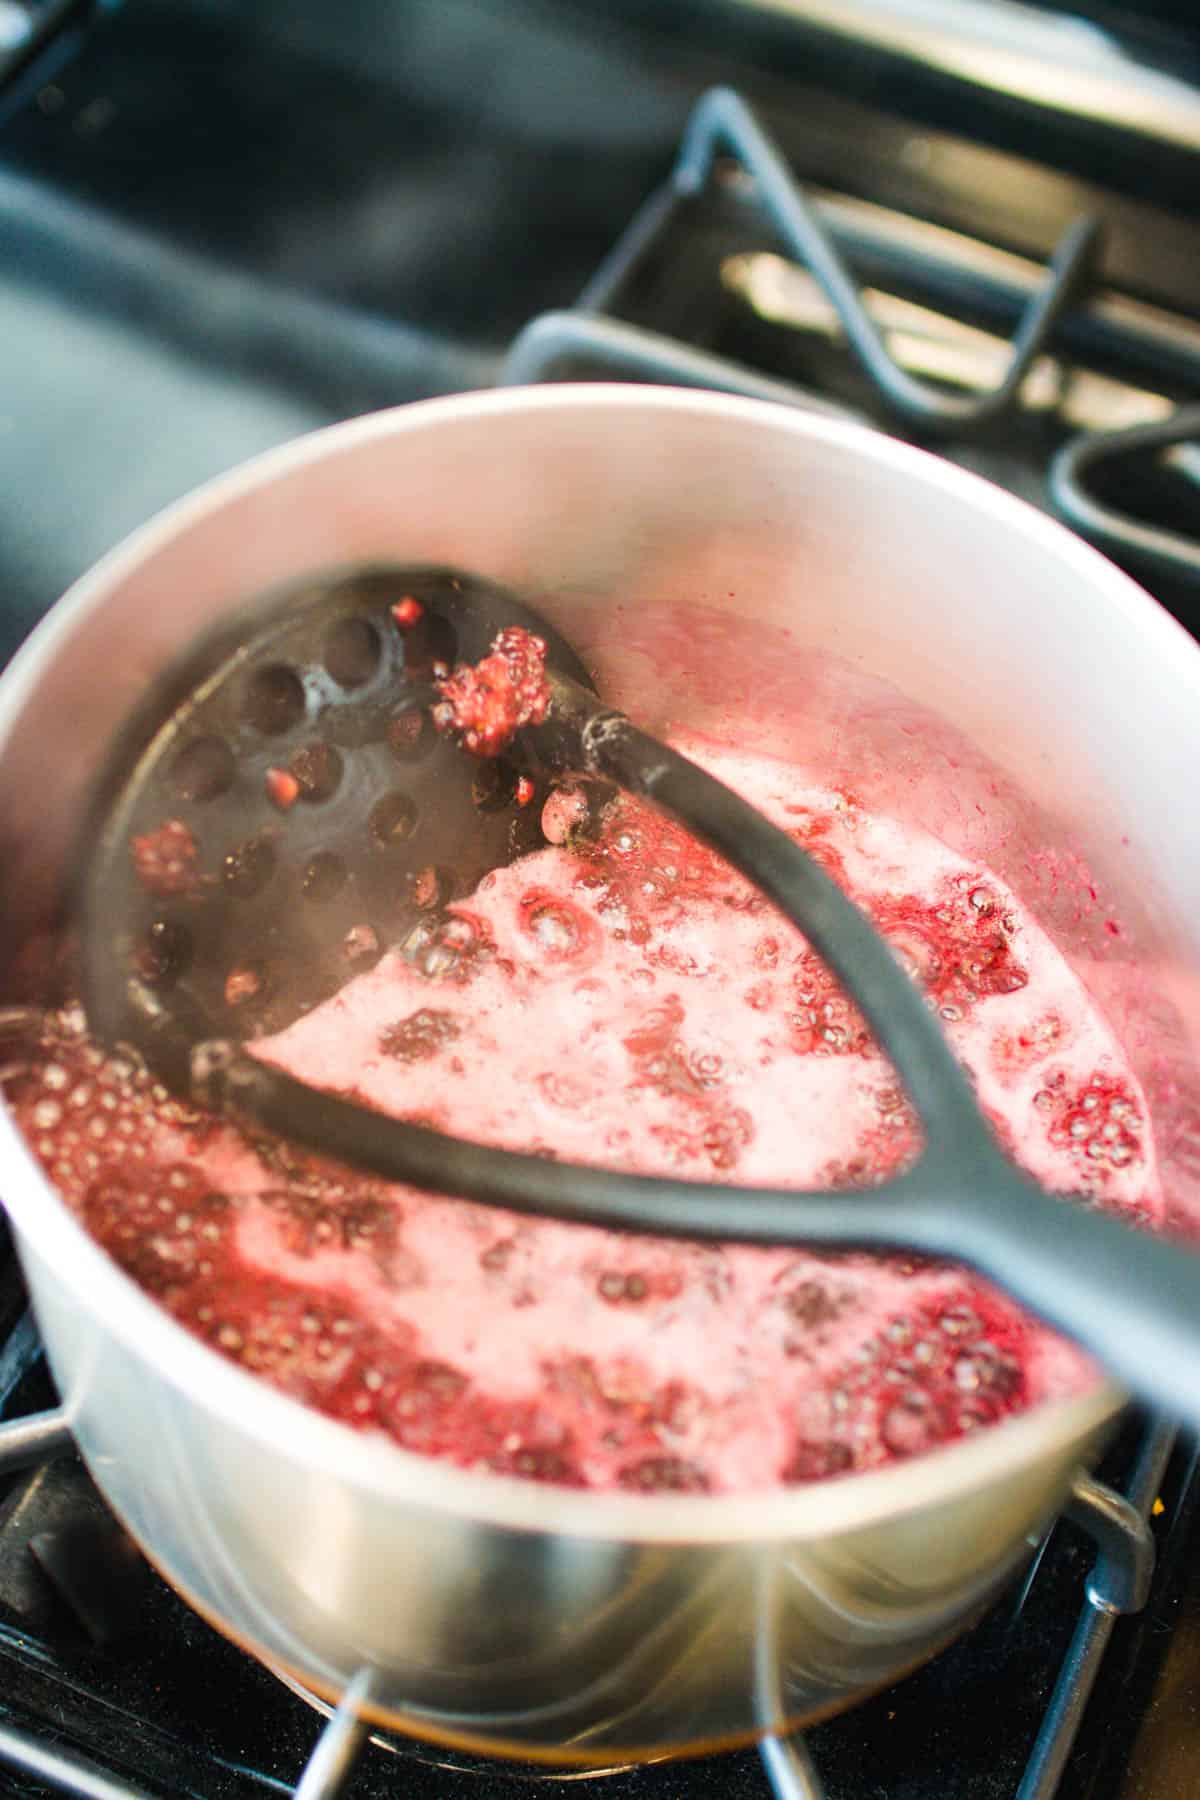 Mashing up blackberries once they've cooked down on the stovetop.